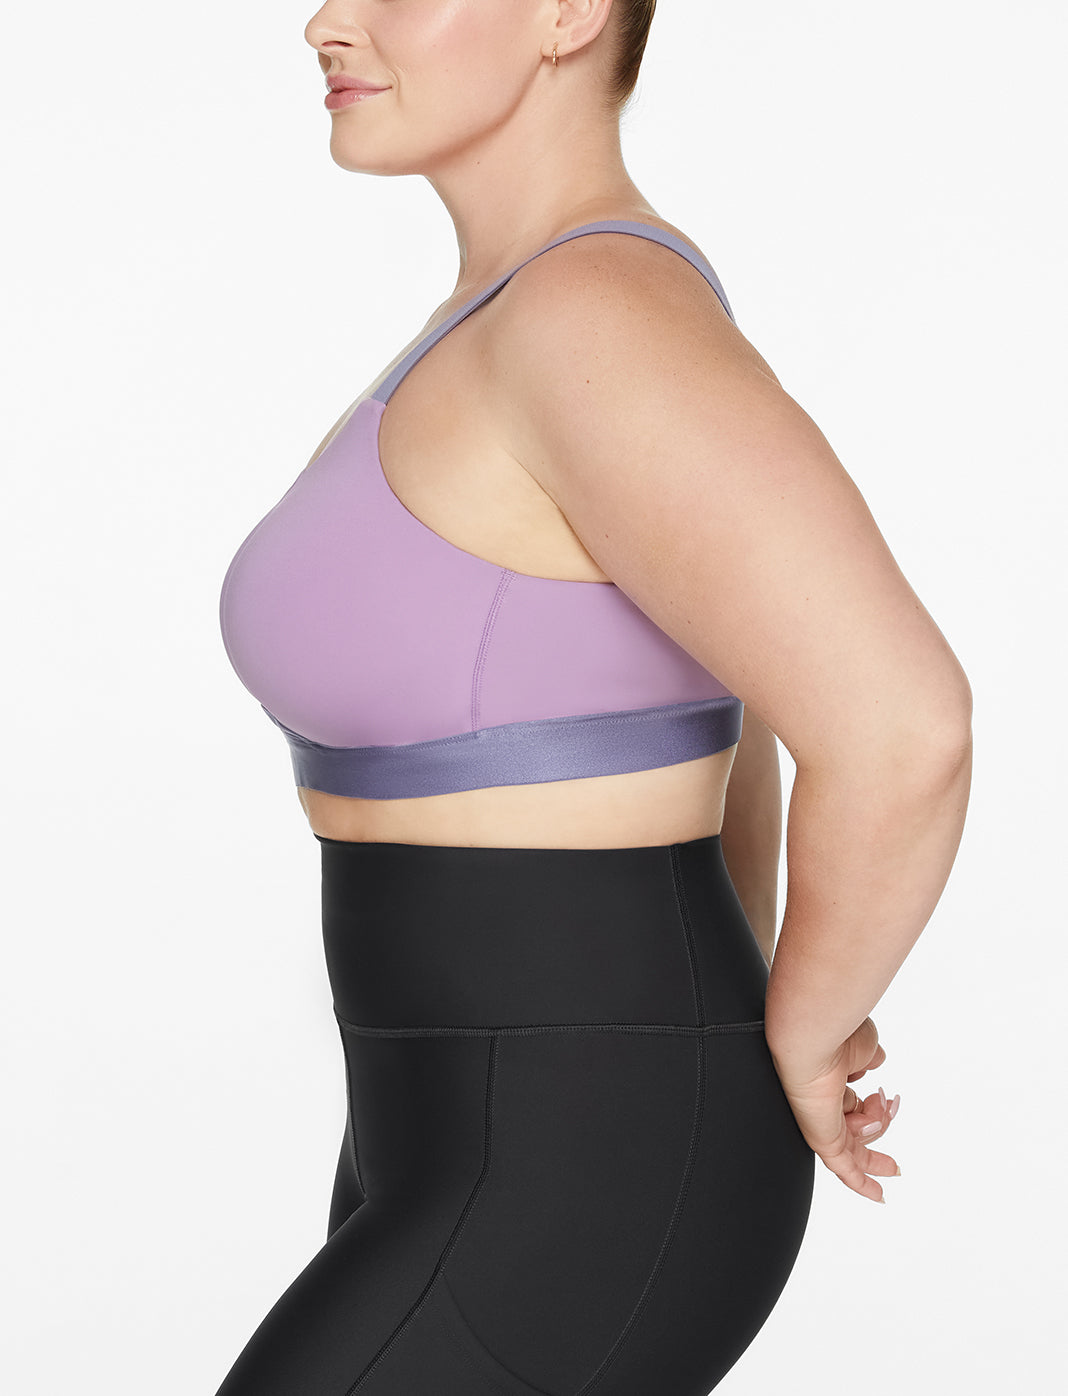 $20 Off Team-Fave ThirdLove Sports Bra, Convertible Design, Lightweight, &  Awesome Reviews